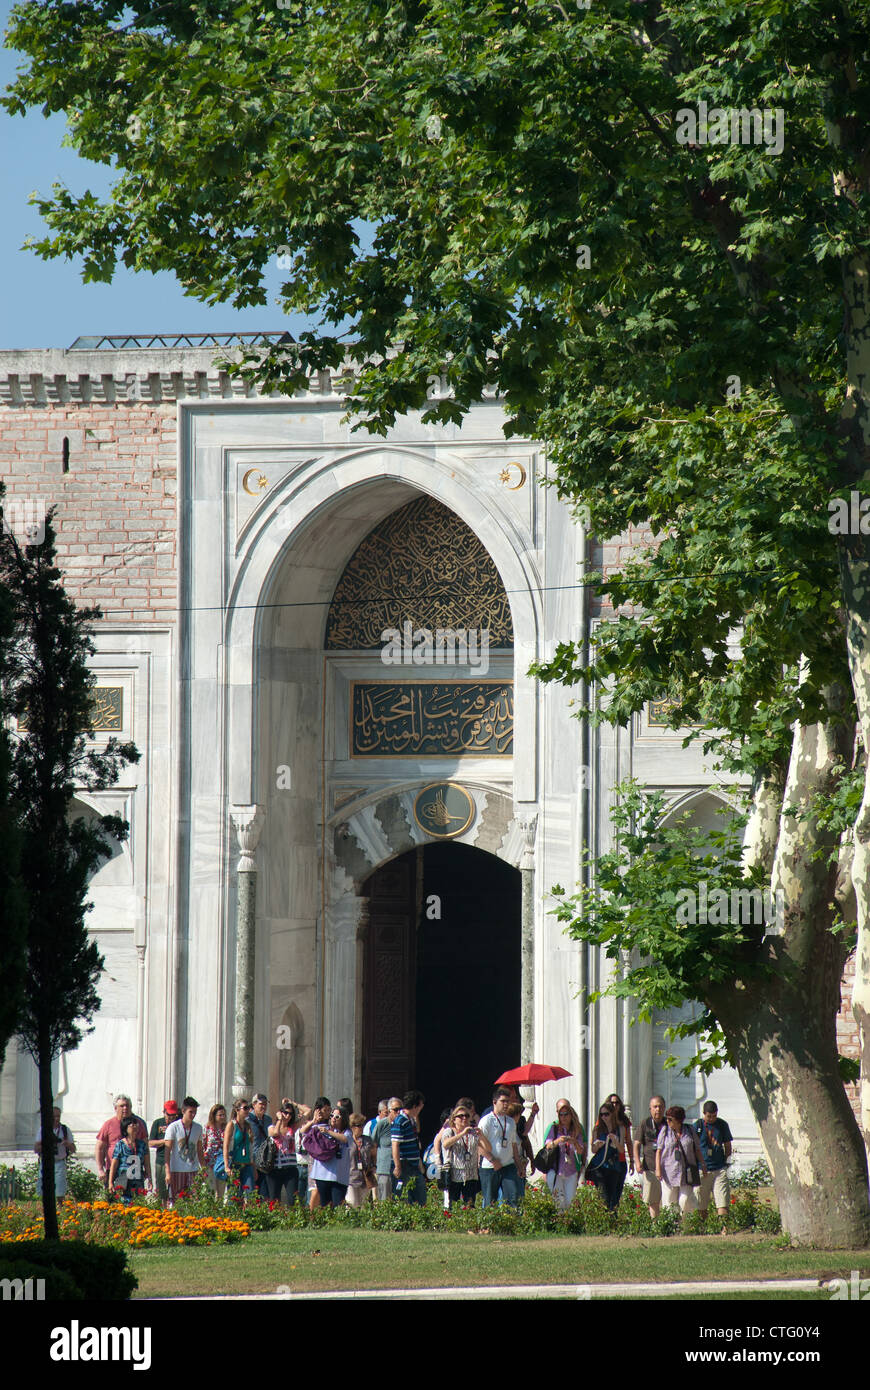 ISTANBUL, TURKEY. Mehmet the Conqueror's Bab-i Humayun (Imperial Gateway) in the first court at Topkapi Palace. 2012. Stock Photo